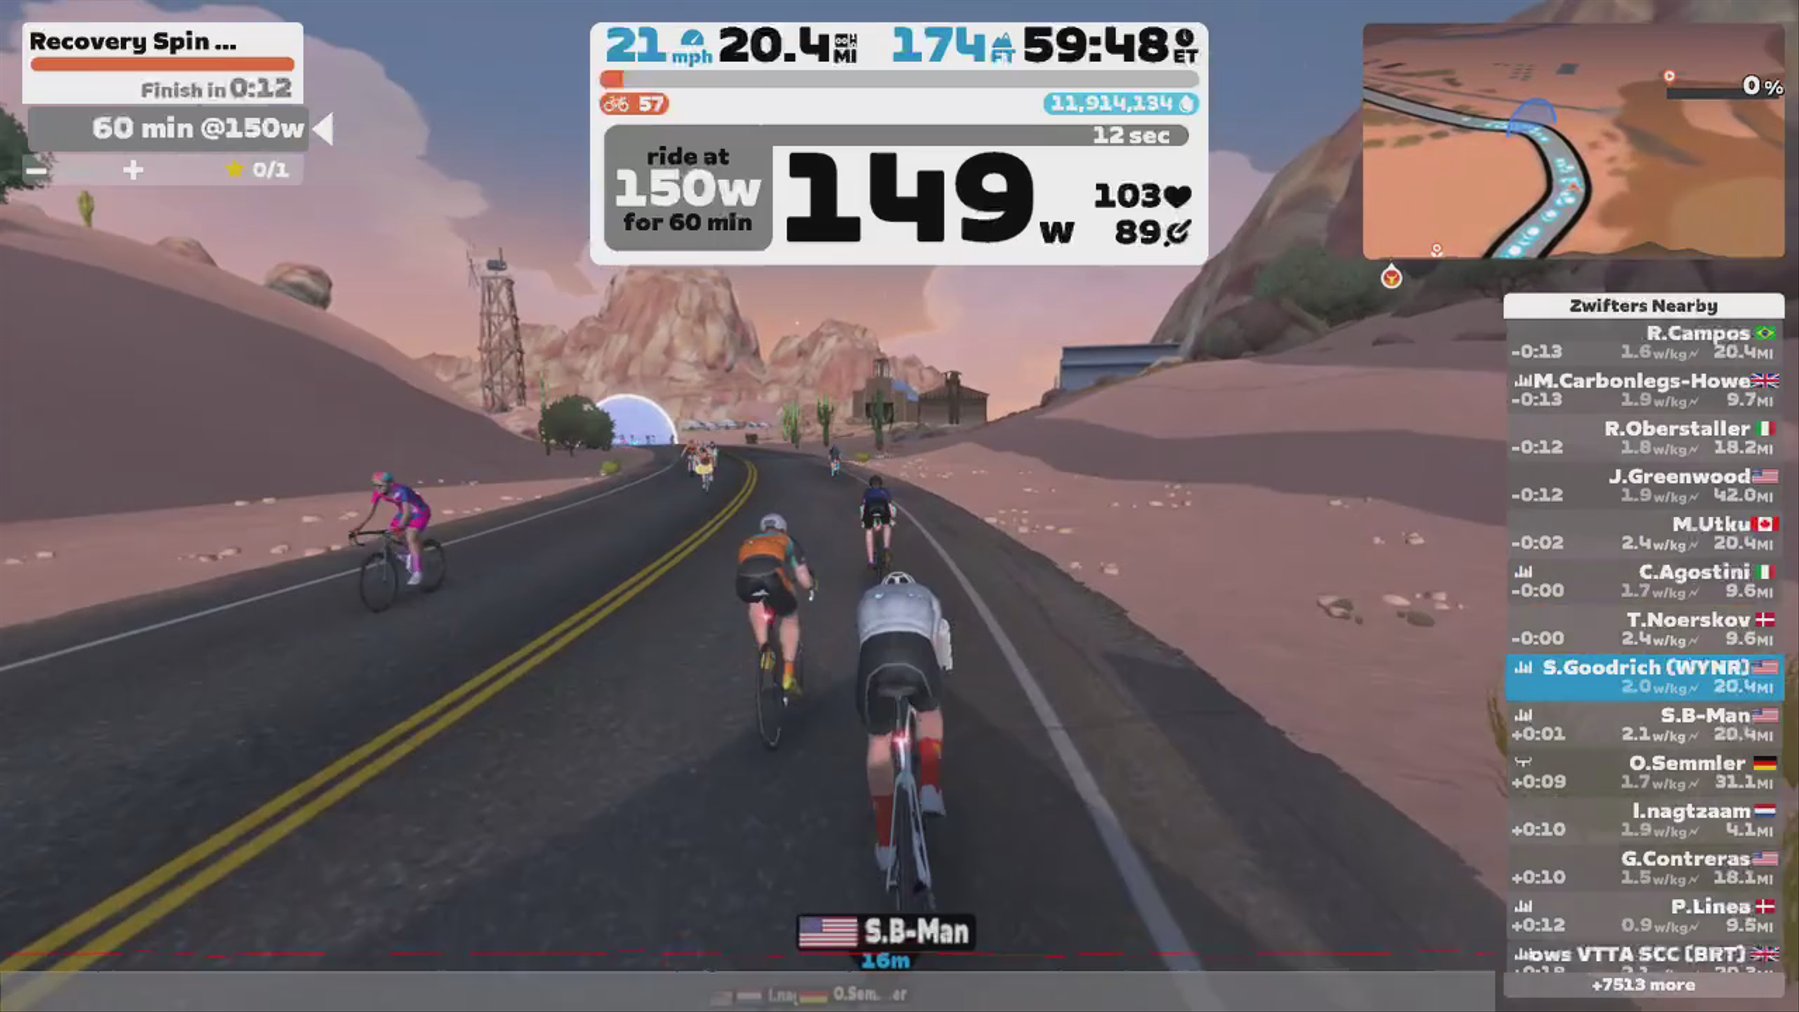 Zwift - Recovery Spin Power-based in Watopia